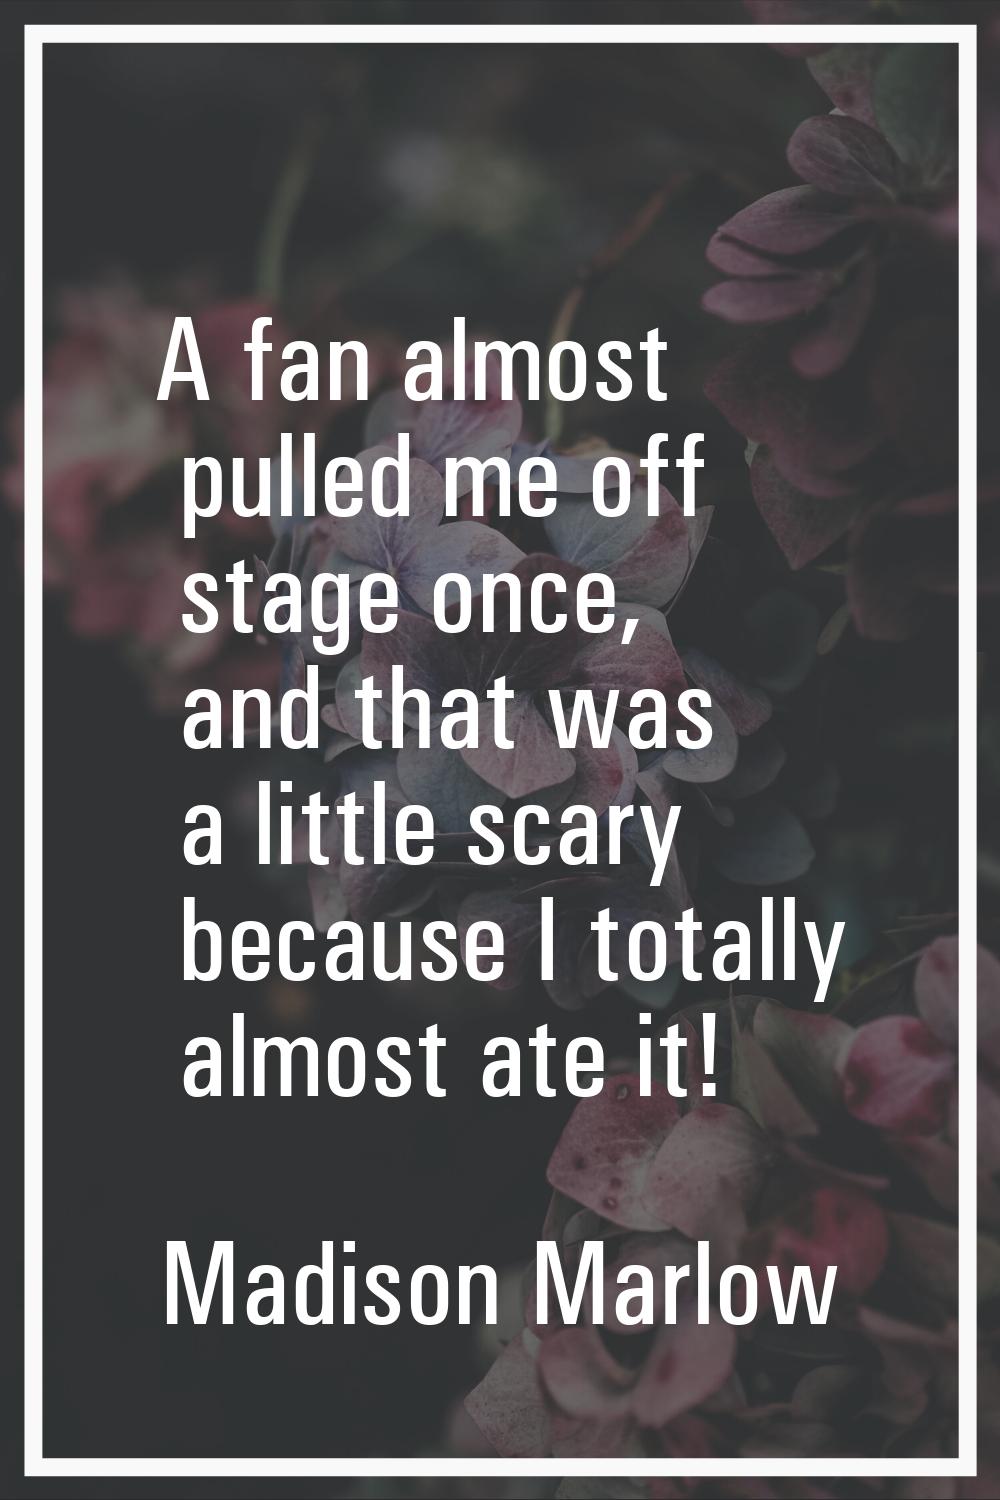 A fan almost pulled me off stage once, and that was a little scary because I totally almost ate it!